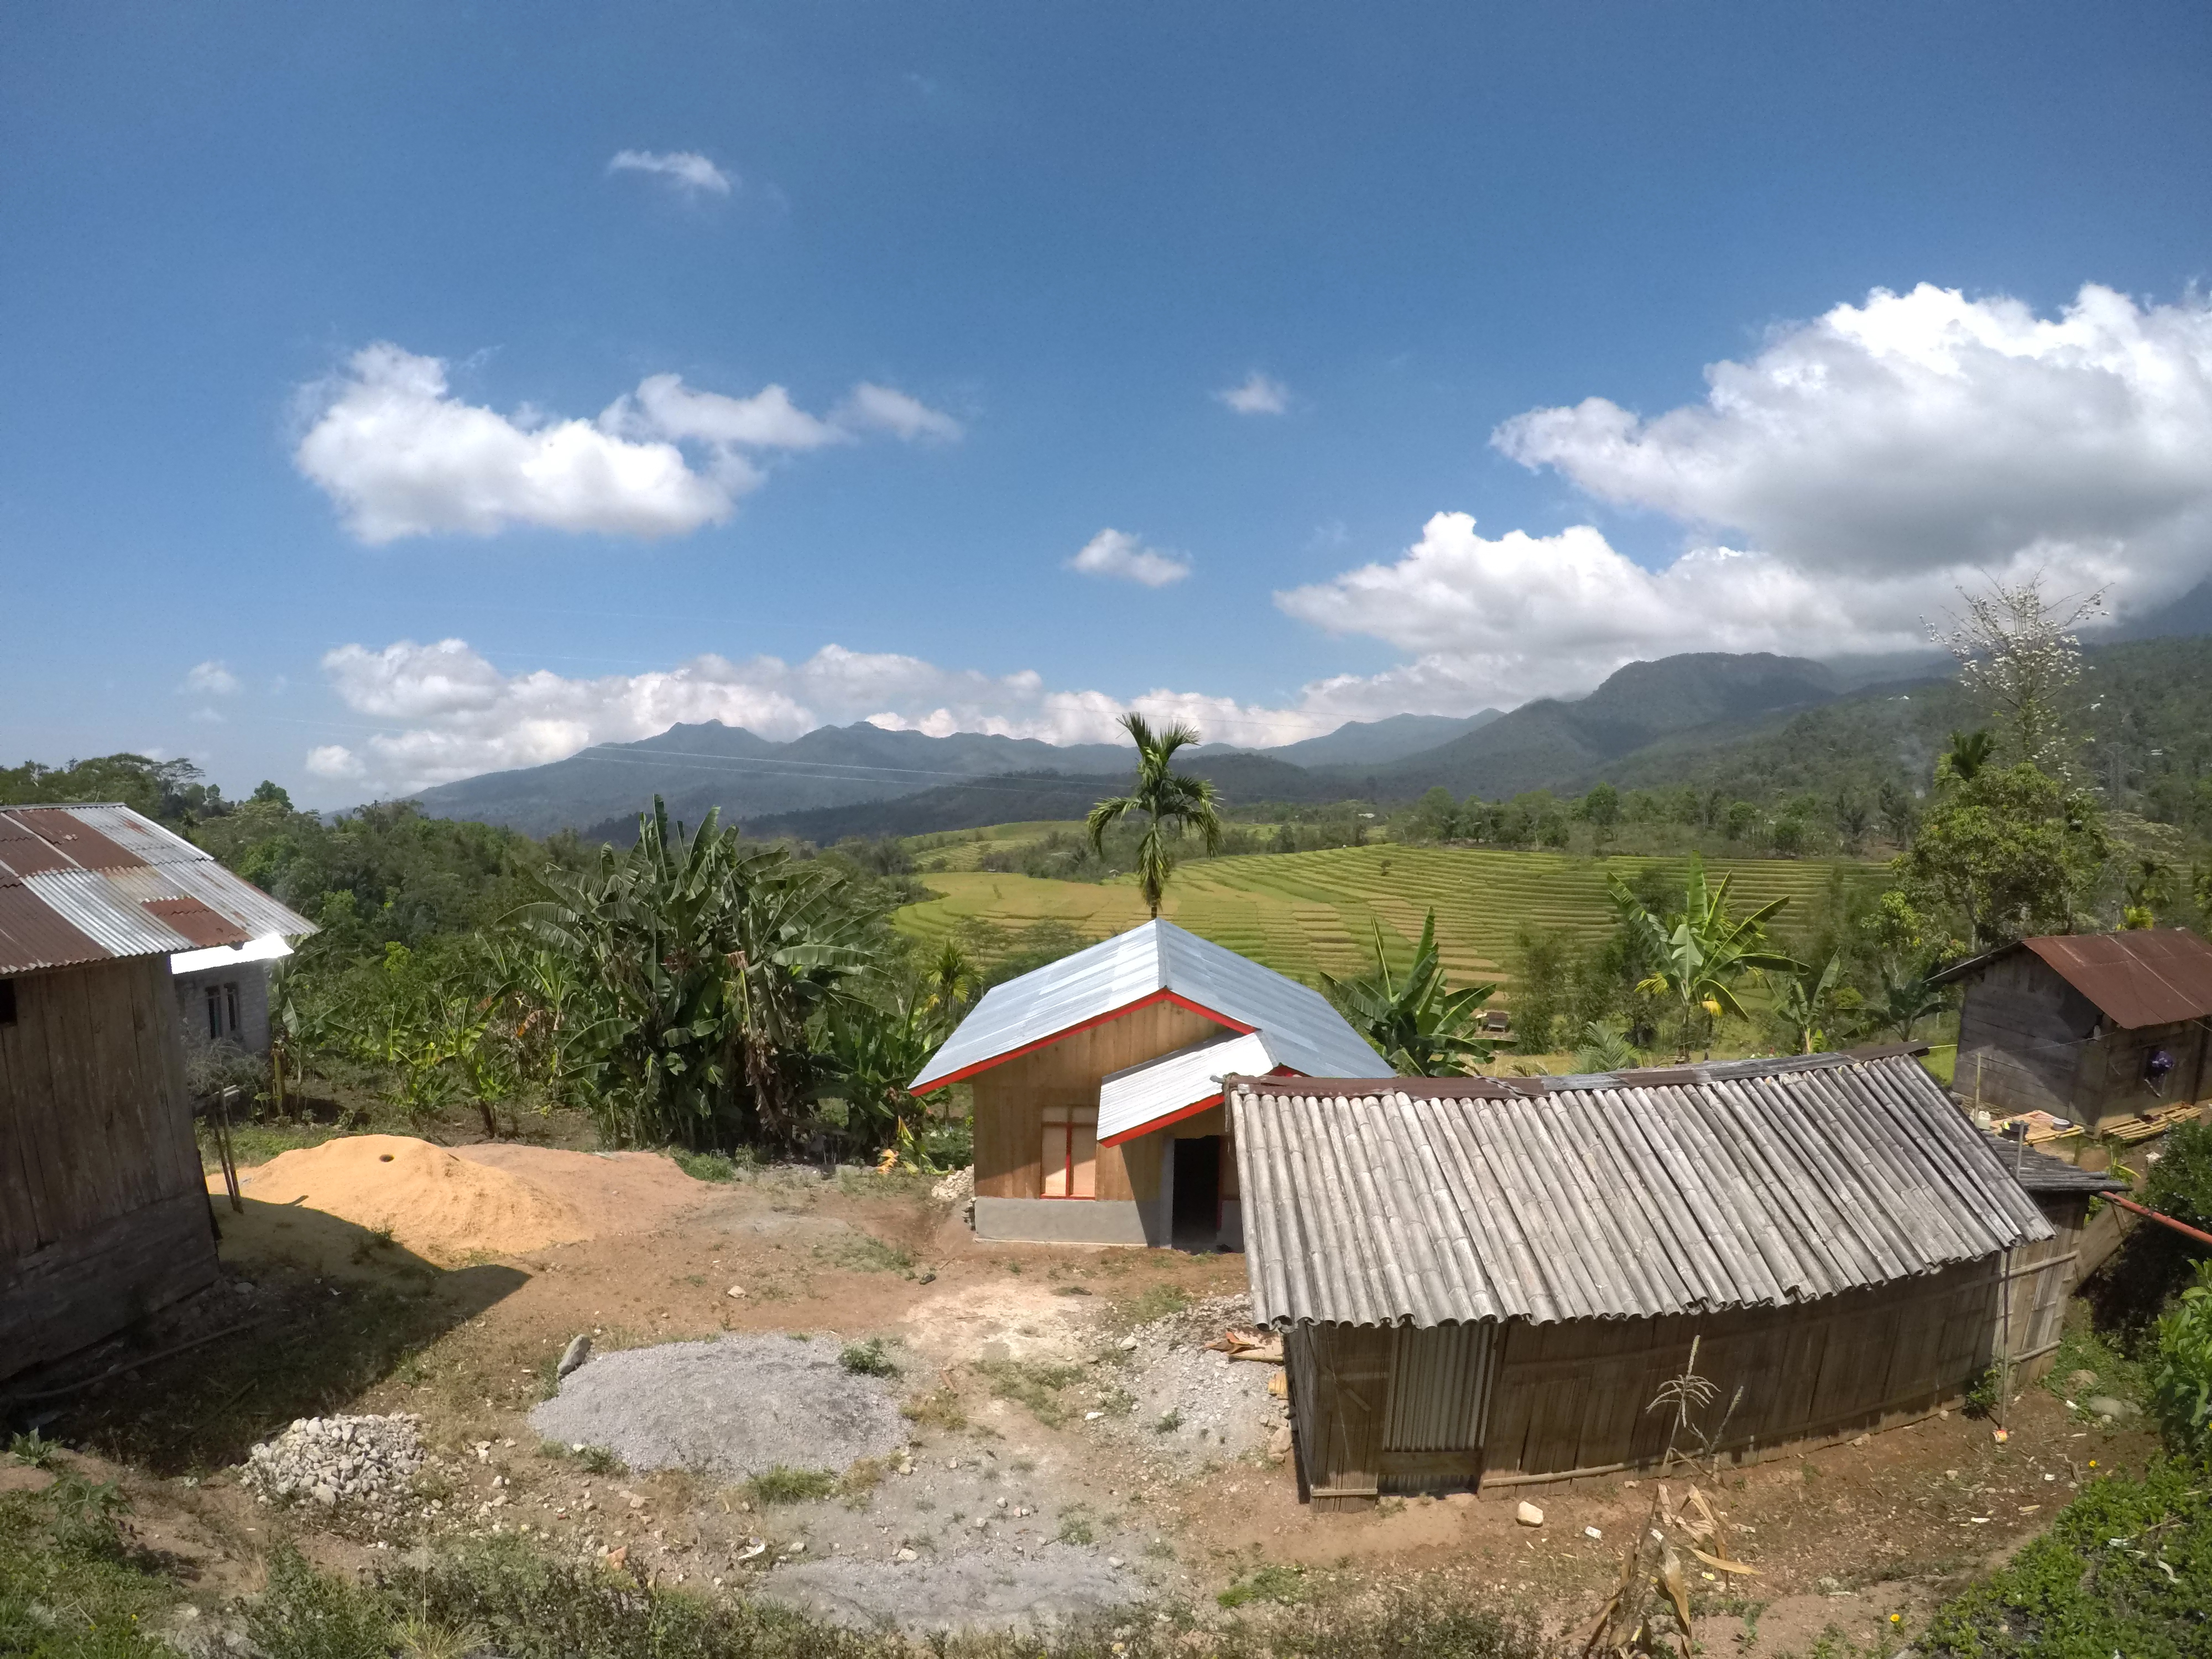 Four tin houses above a vast paddy field with rows of mountains in the distance.